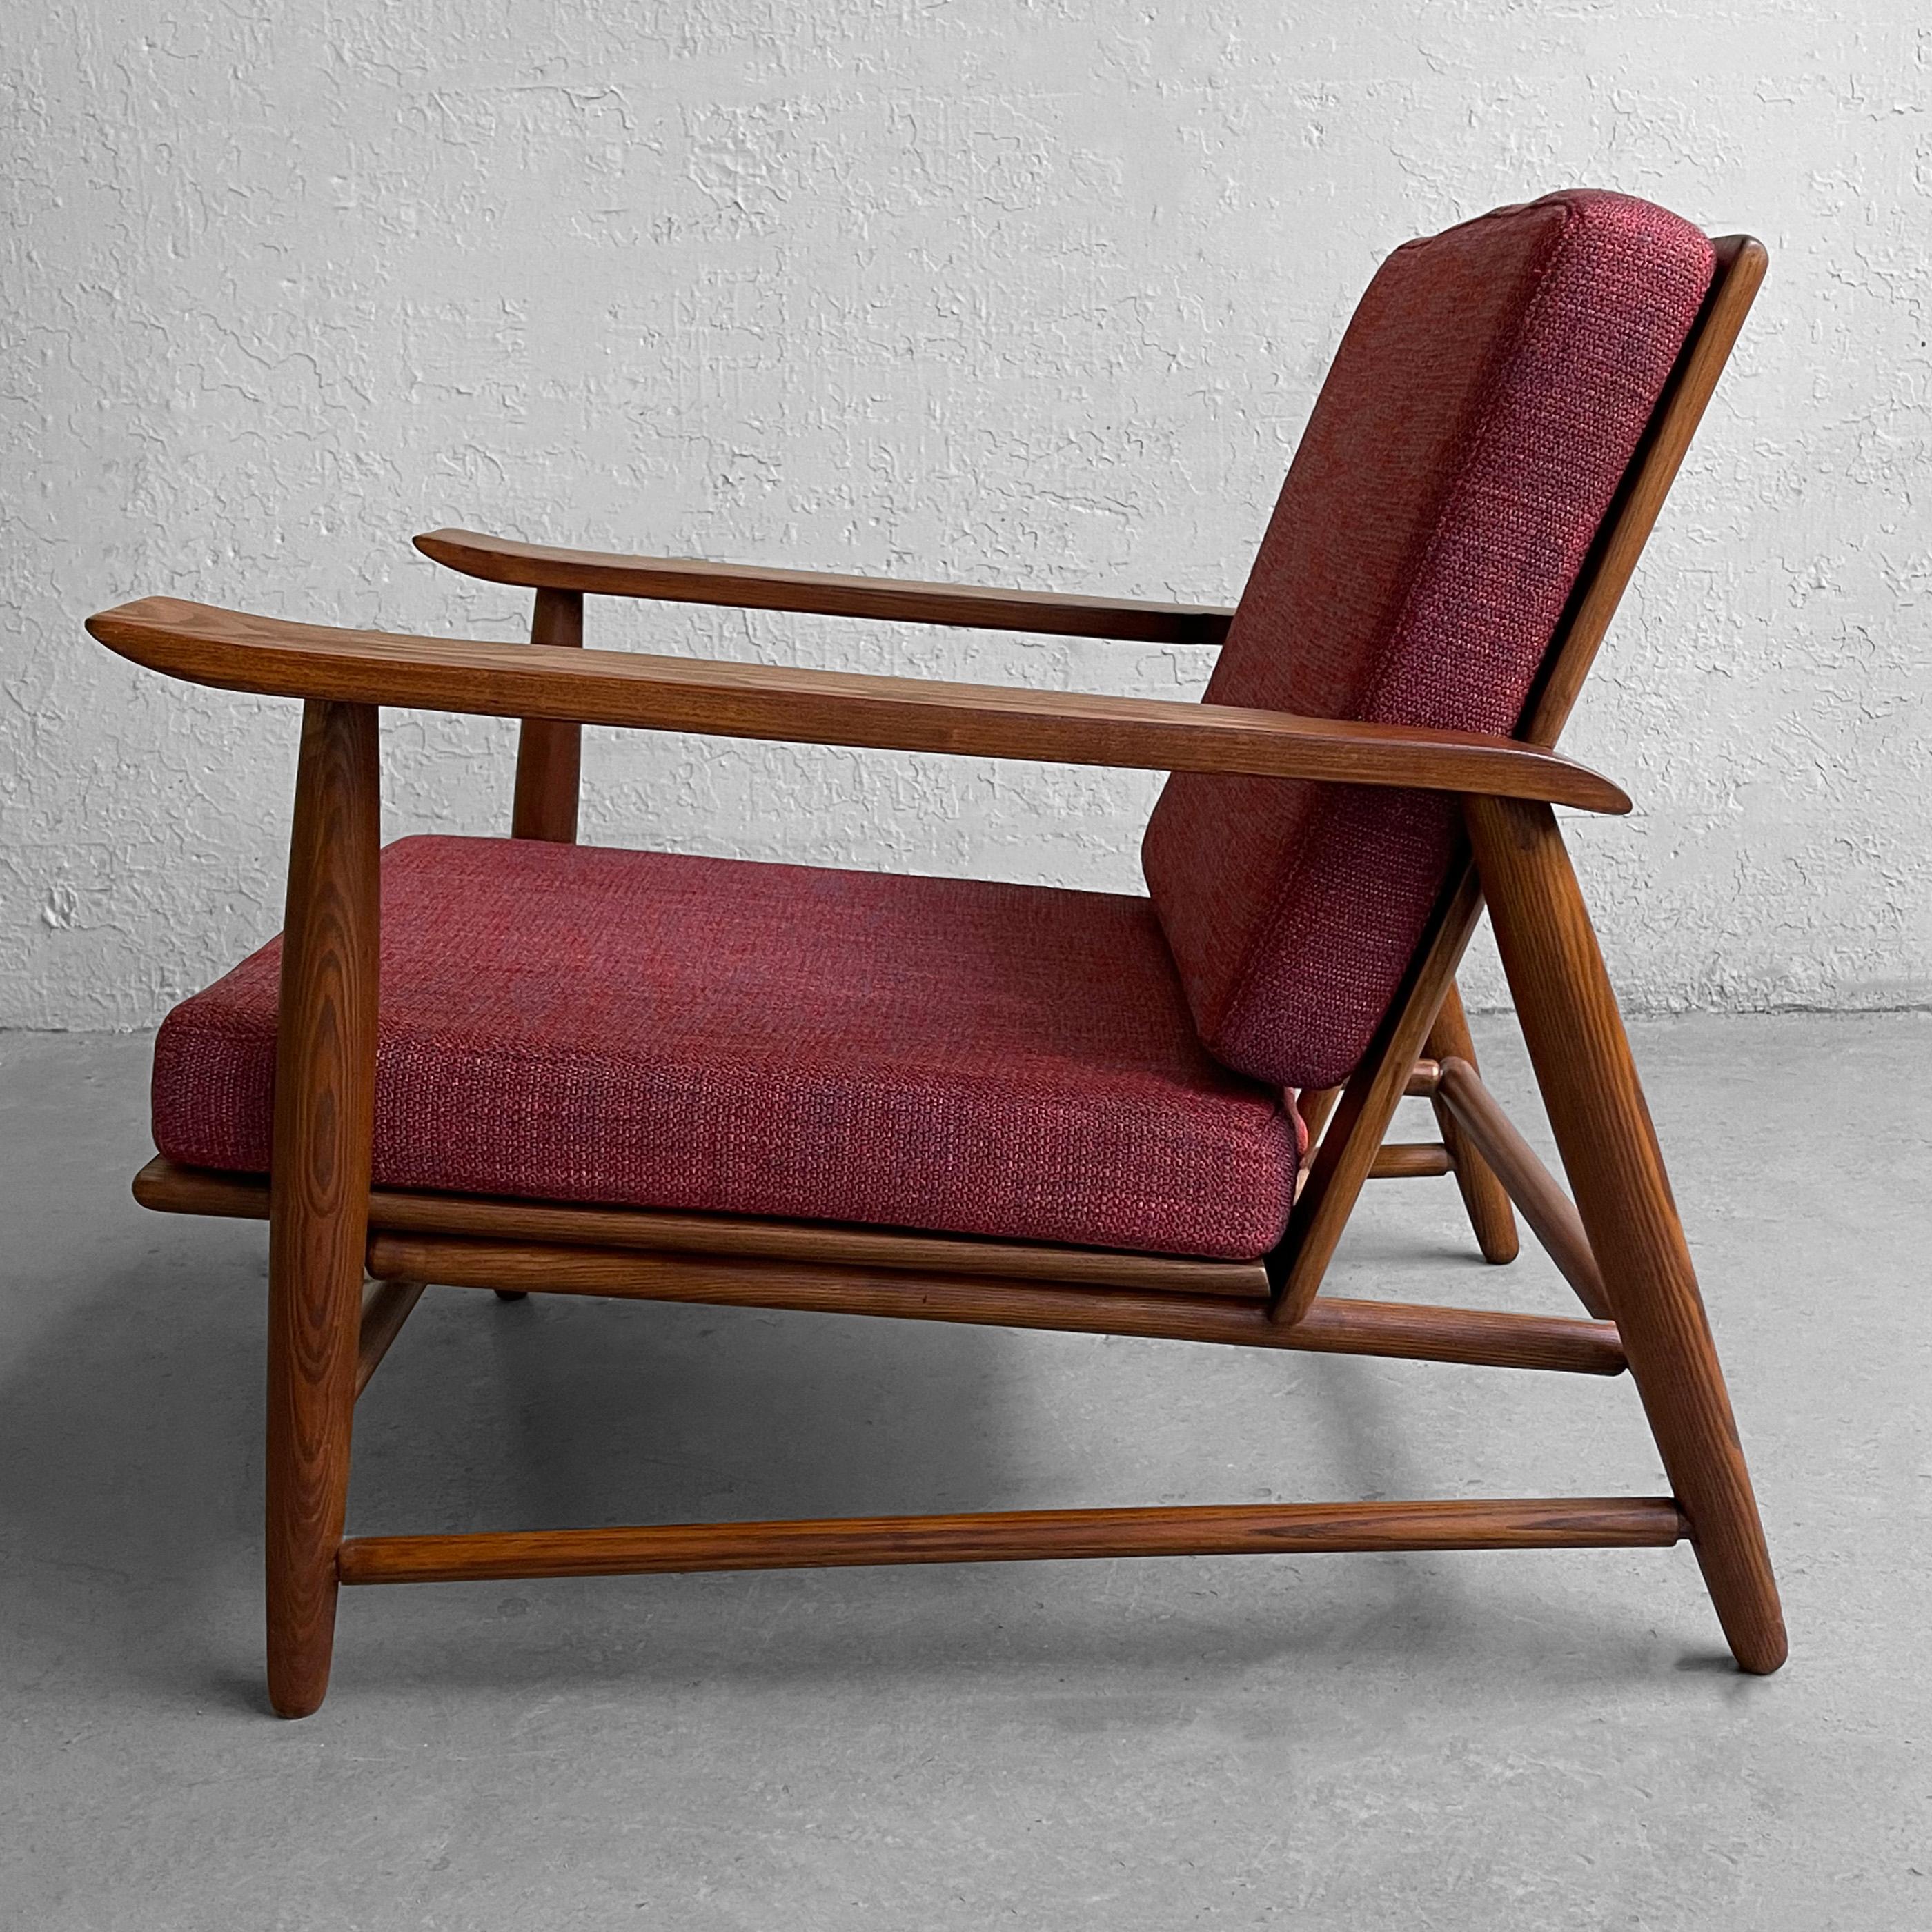 20th Century Mid-Century Modern Oak Lounge Chair by Heywood Wakefield For Sale